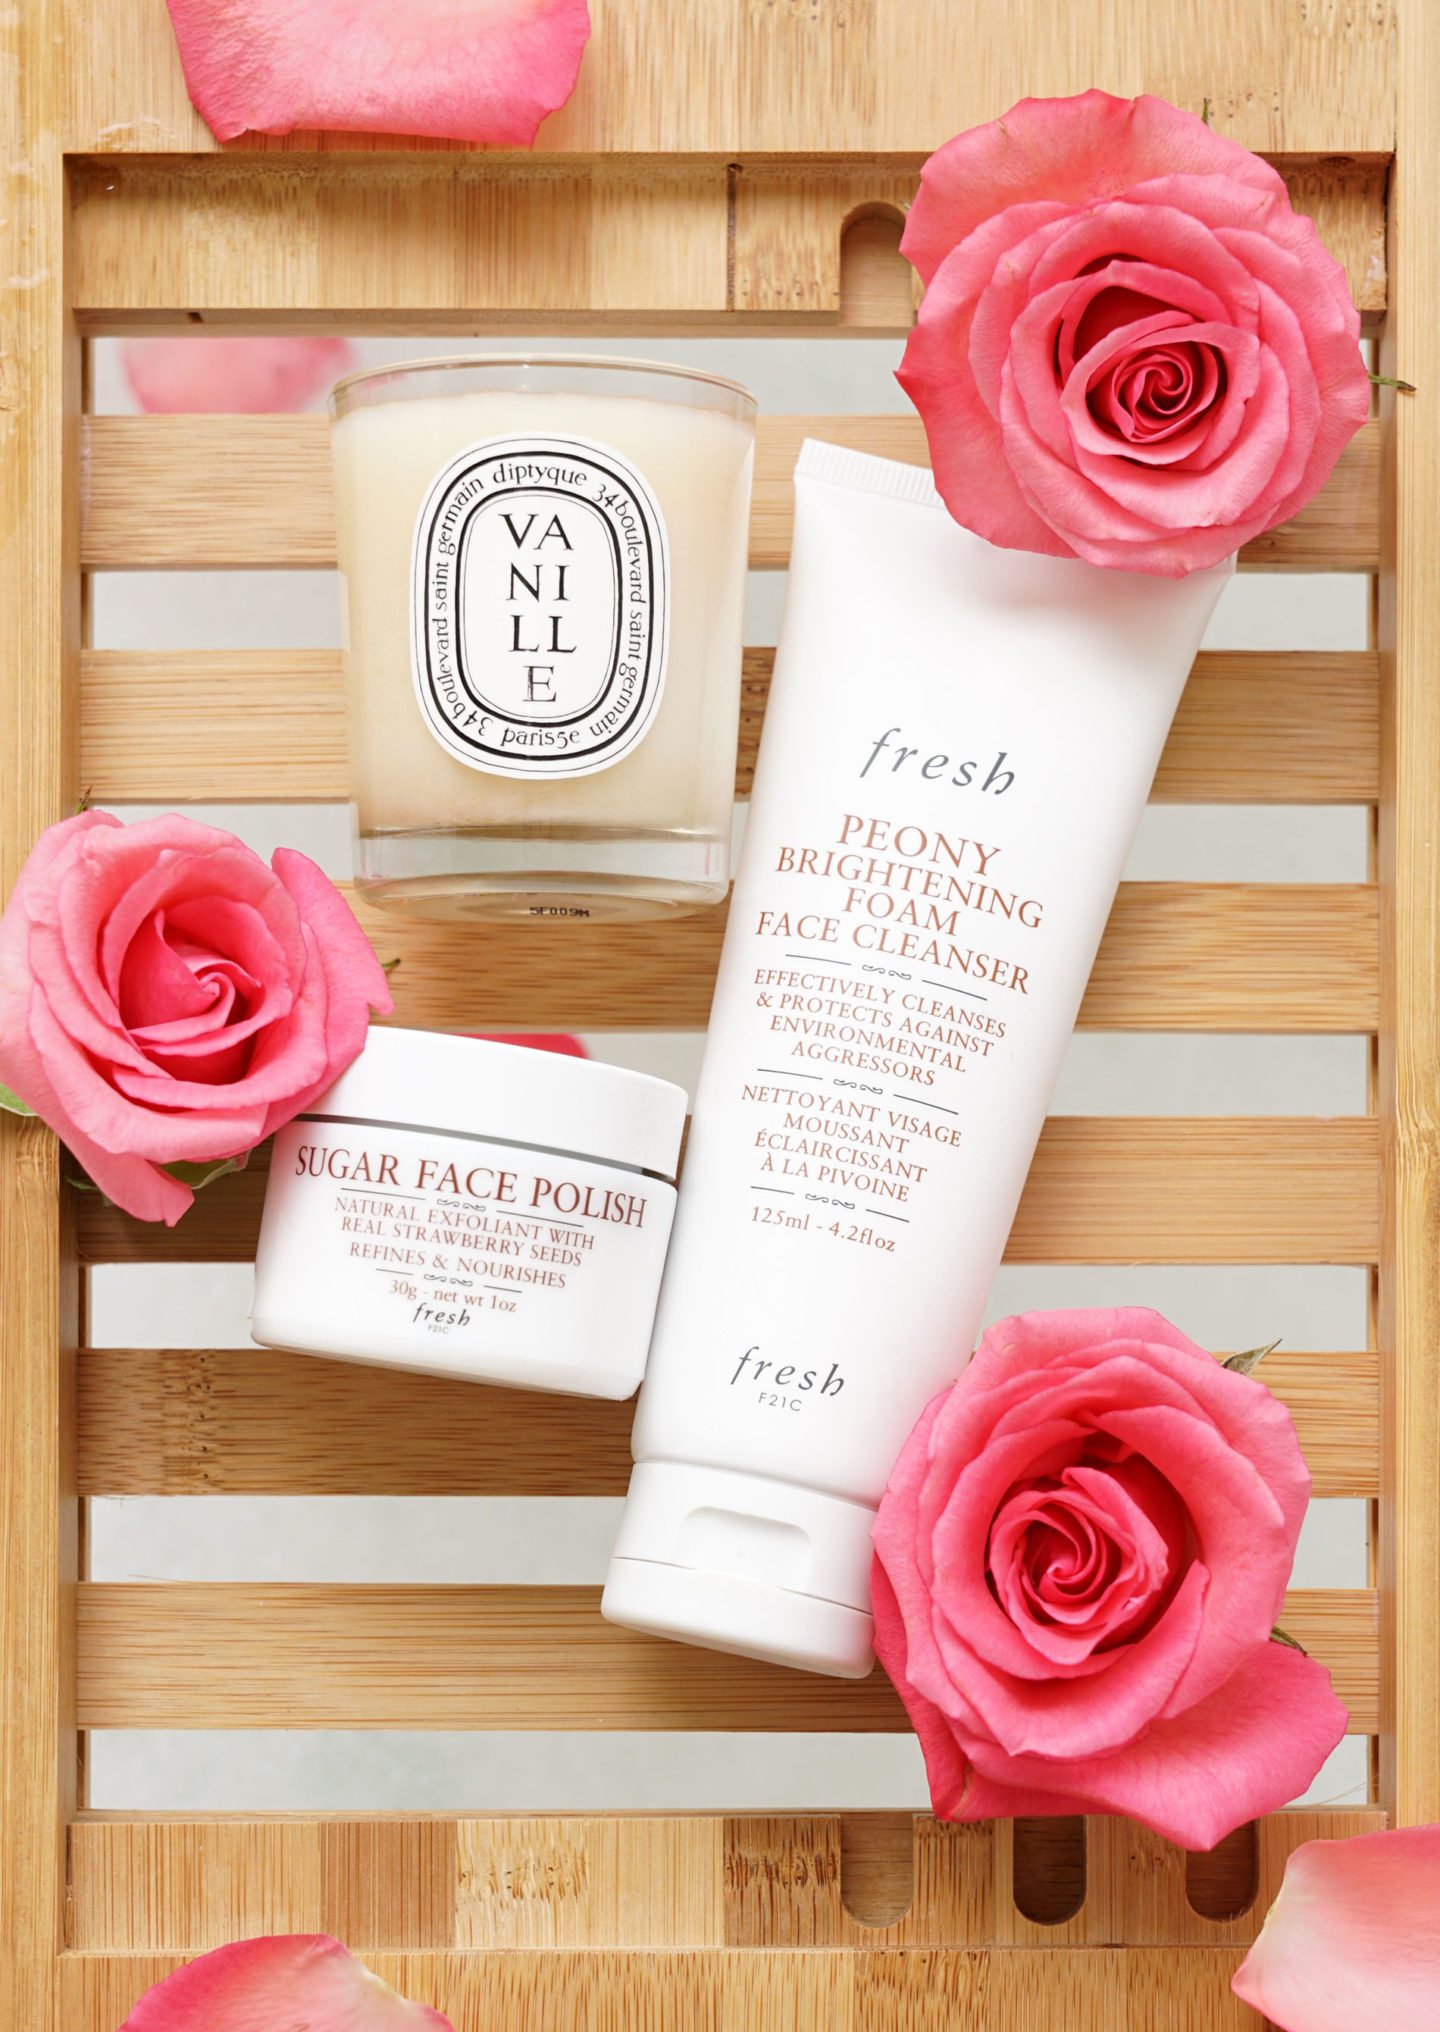 Fresh Peony Brightening Face Cleanser